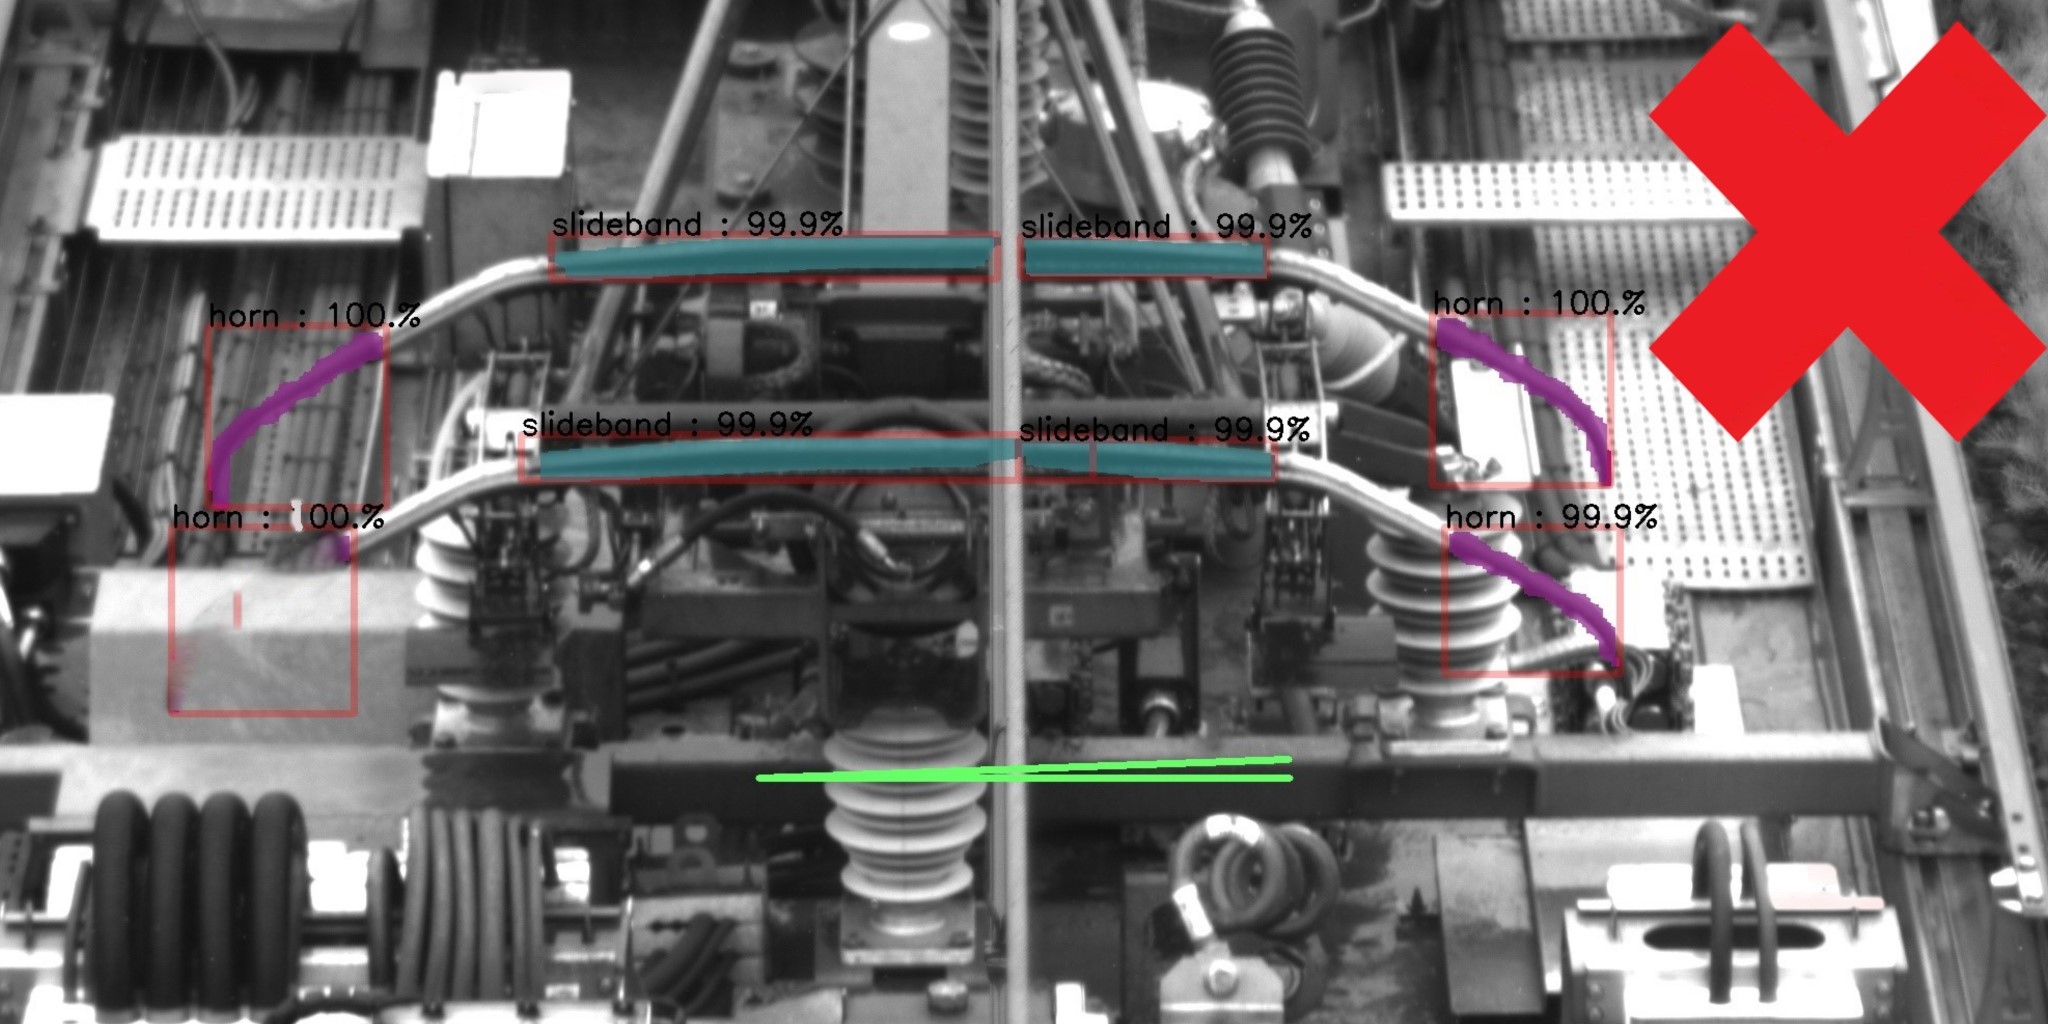 The embedded artificial intelligence coupled with image processing on a deep learning basis monitors the detected pantographs for compliance and locates faults. The process entails locating and detecting the presence of all horns and the location of contact strips. Moreover, it verifies that the pantograph is perpendicular to the train’s axis. In this image the state of the pantograph is satisfactory.